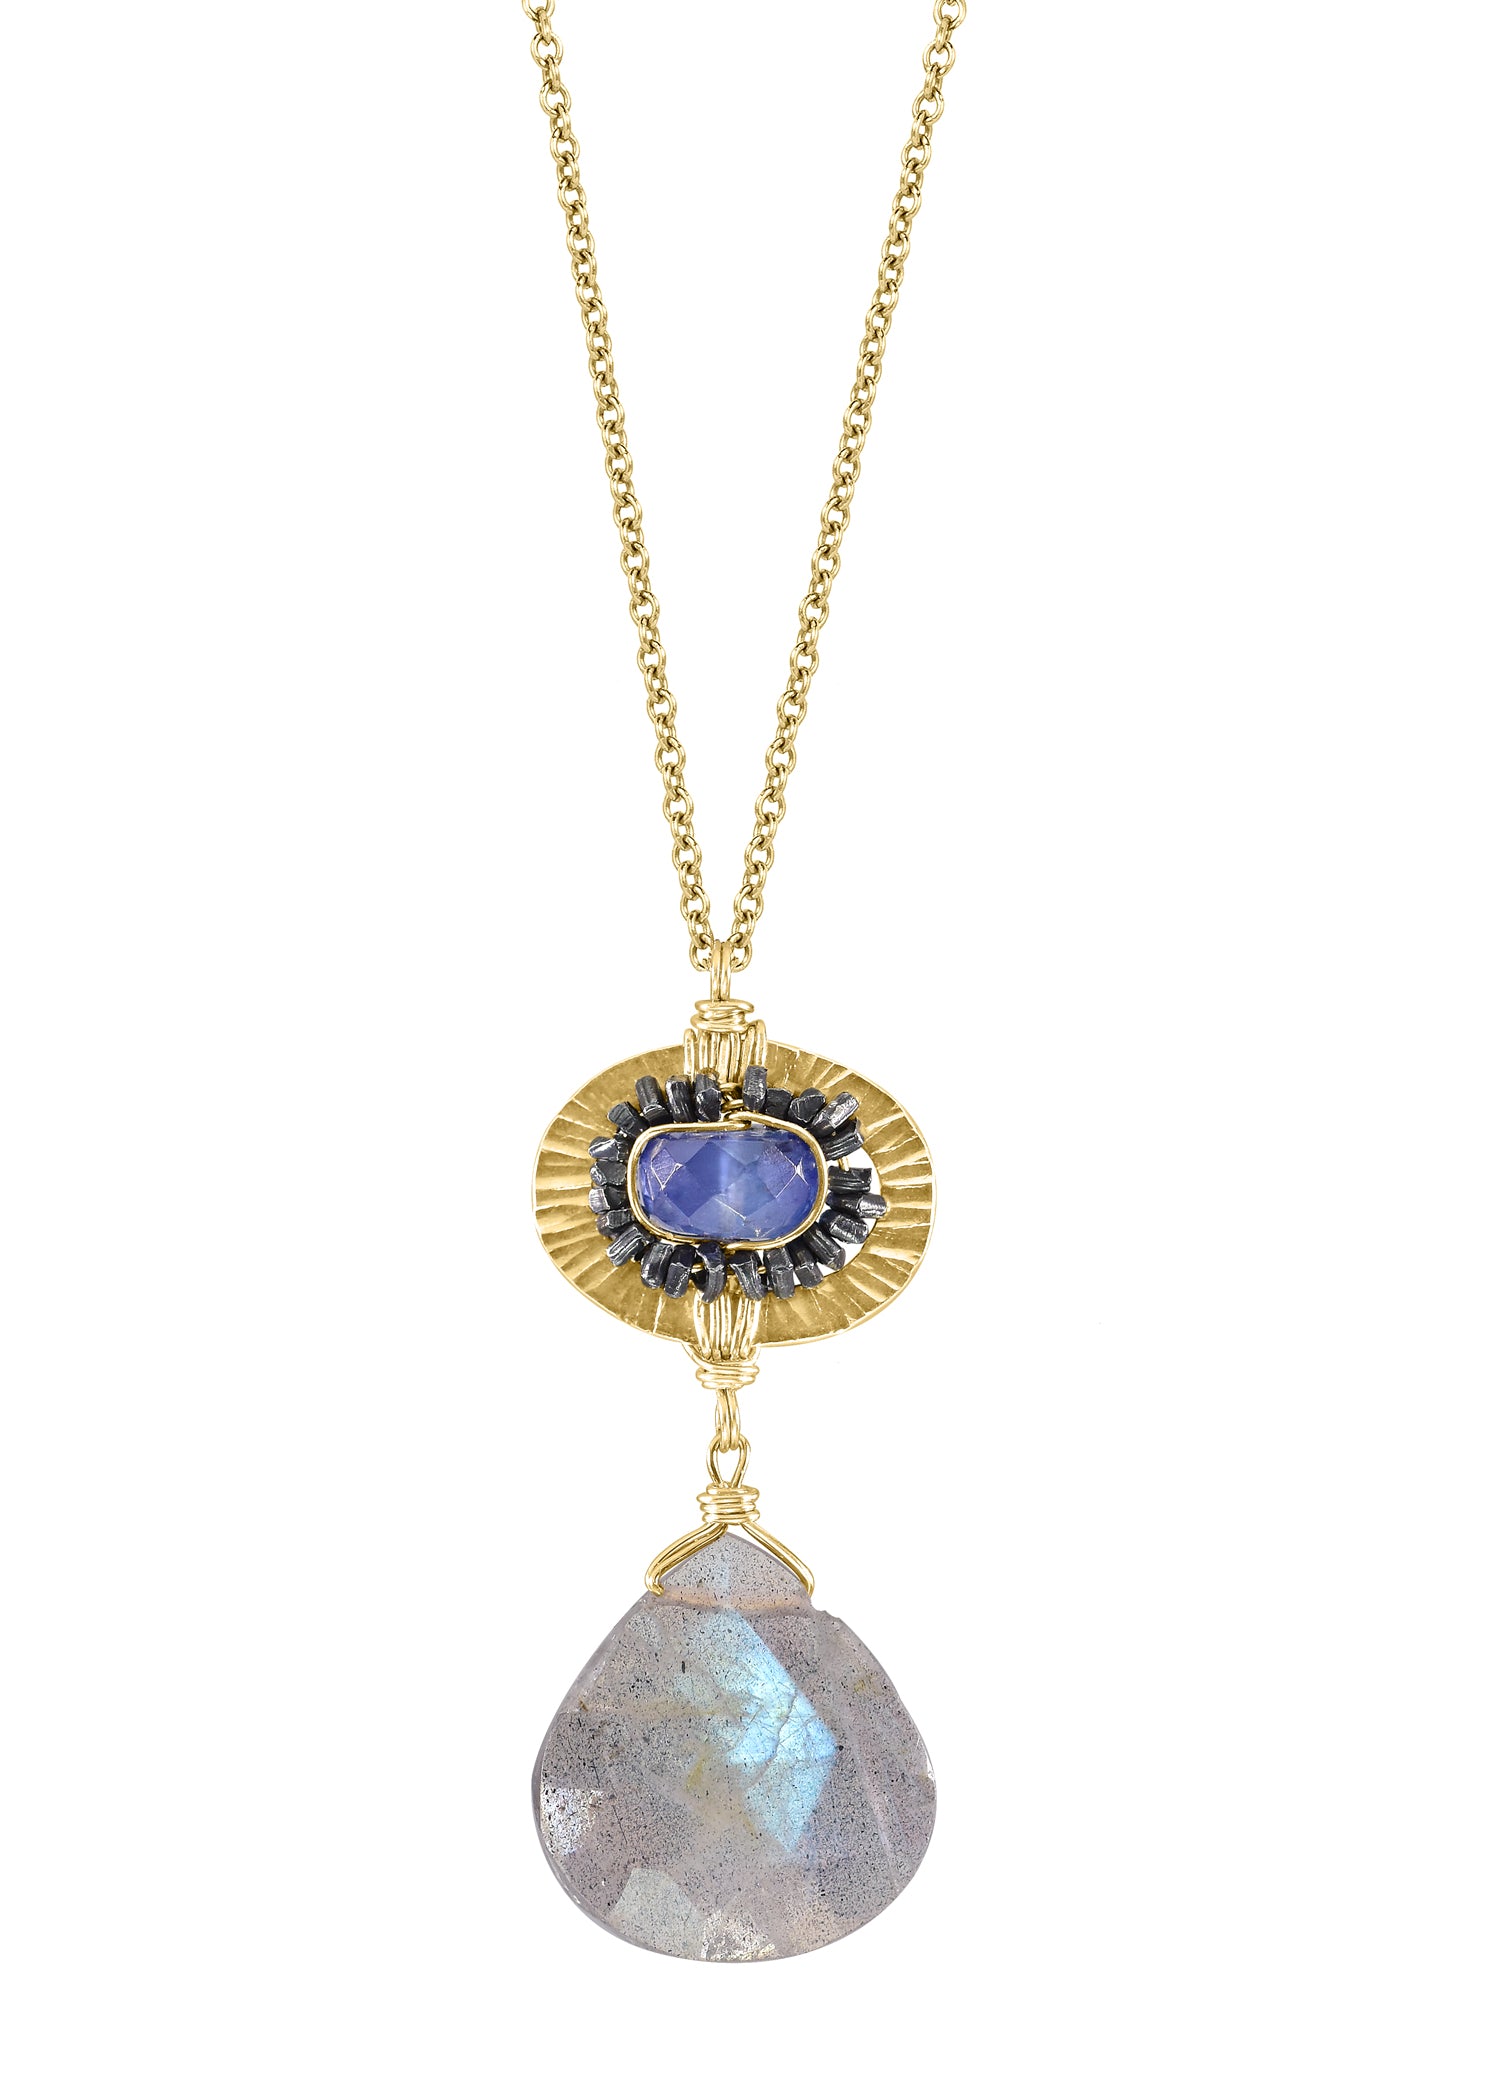 Kyanite Labradorite 14k gold fill Sterling silver Mixed metal Necklace measures 16" in length Pendant measures 1-1/8" in length and 1/2" in width at the widest point Handmade in our Los Angeles studio